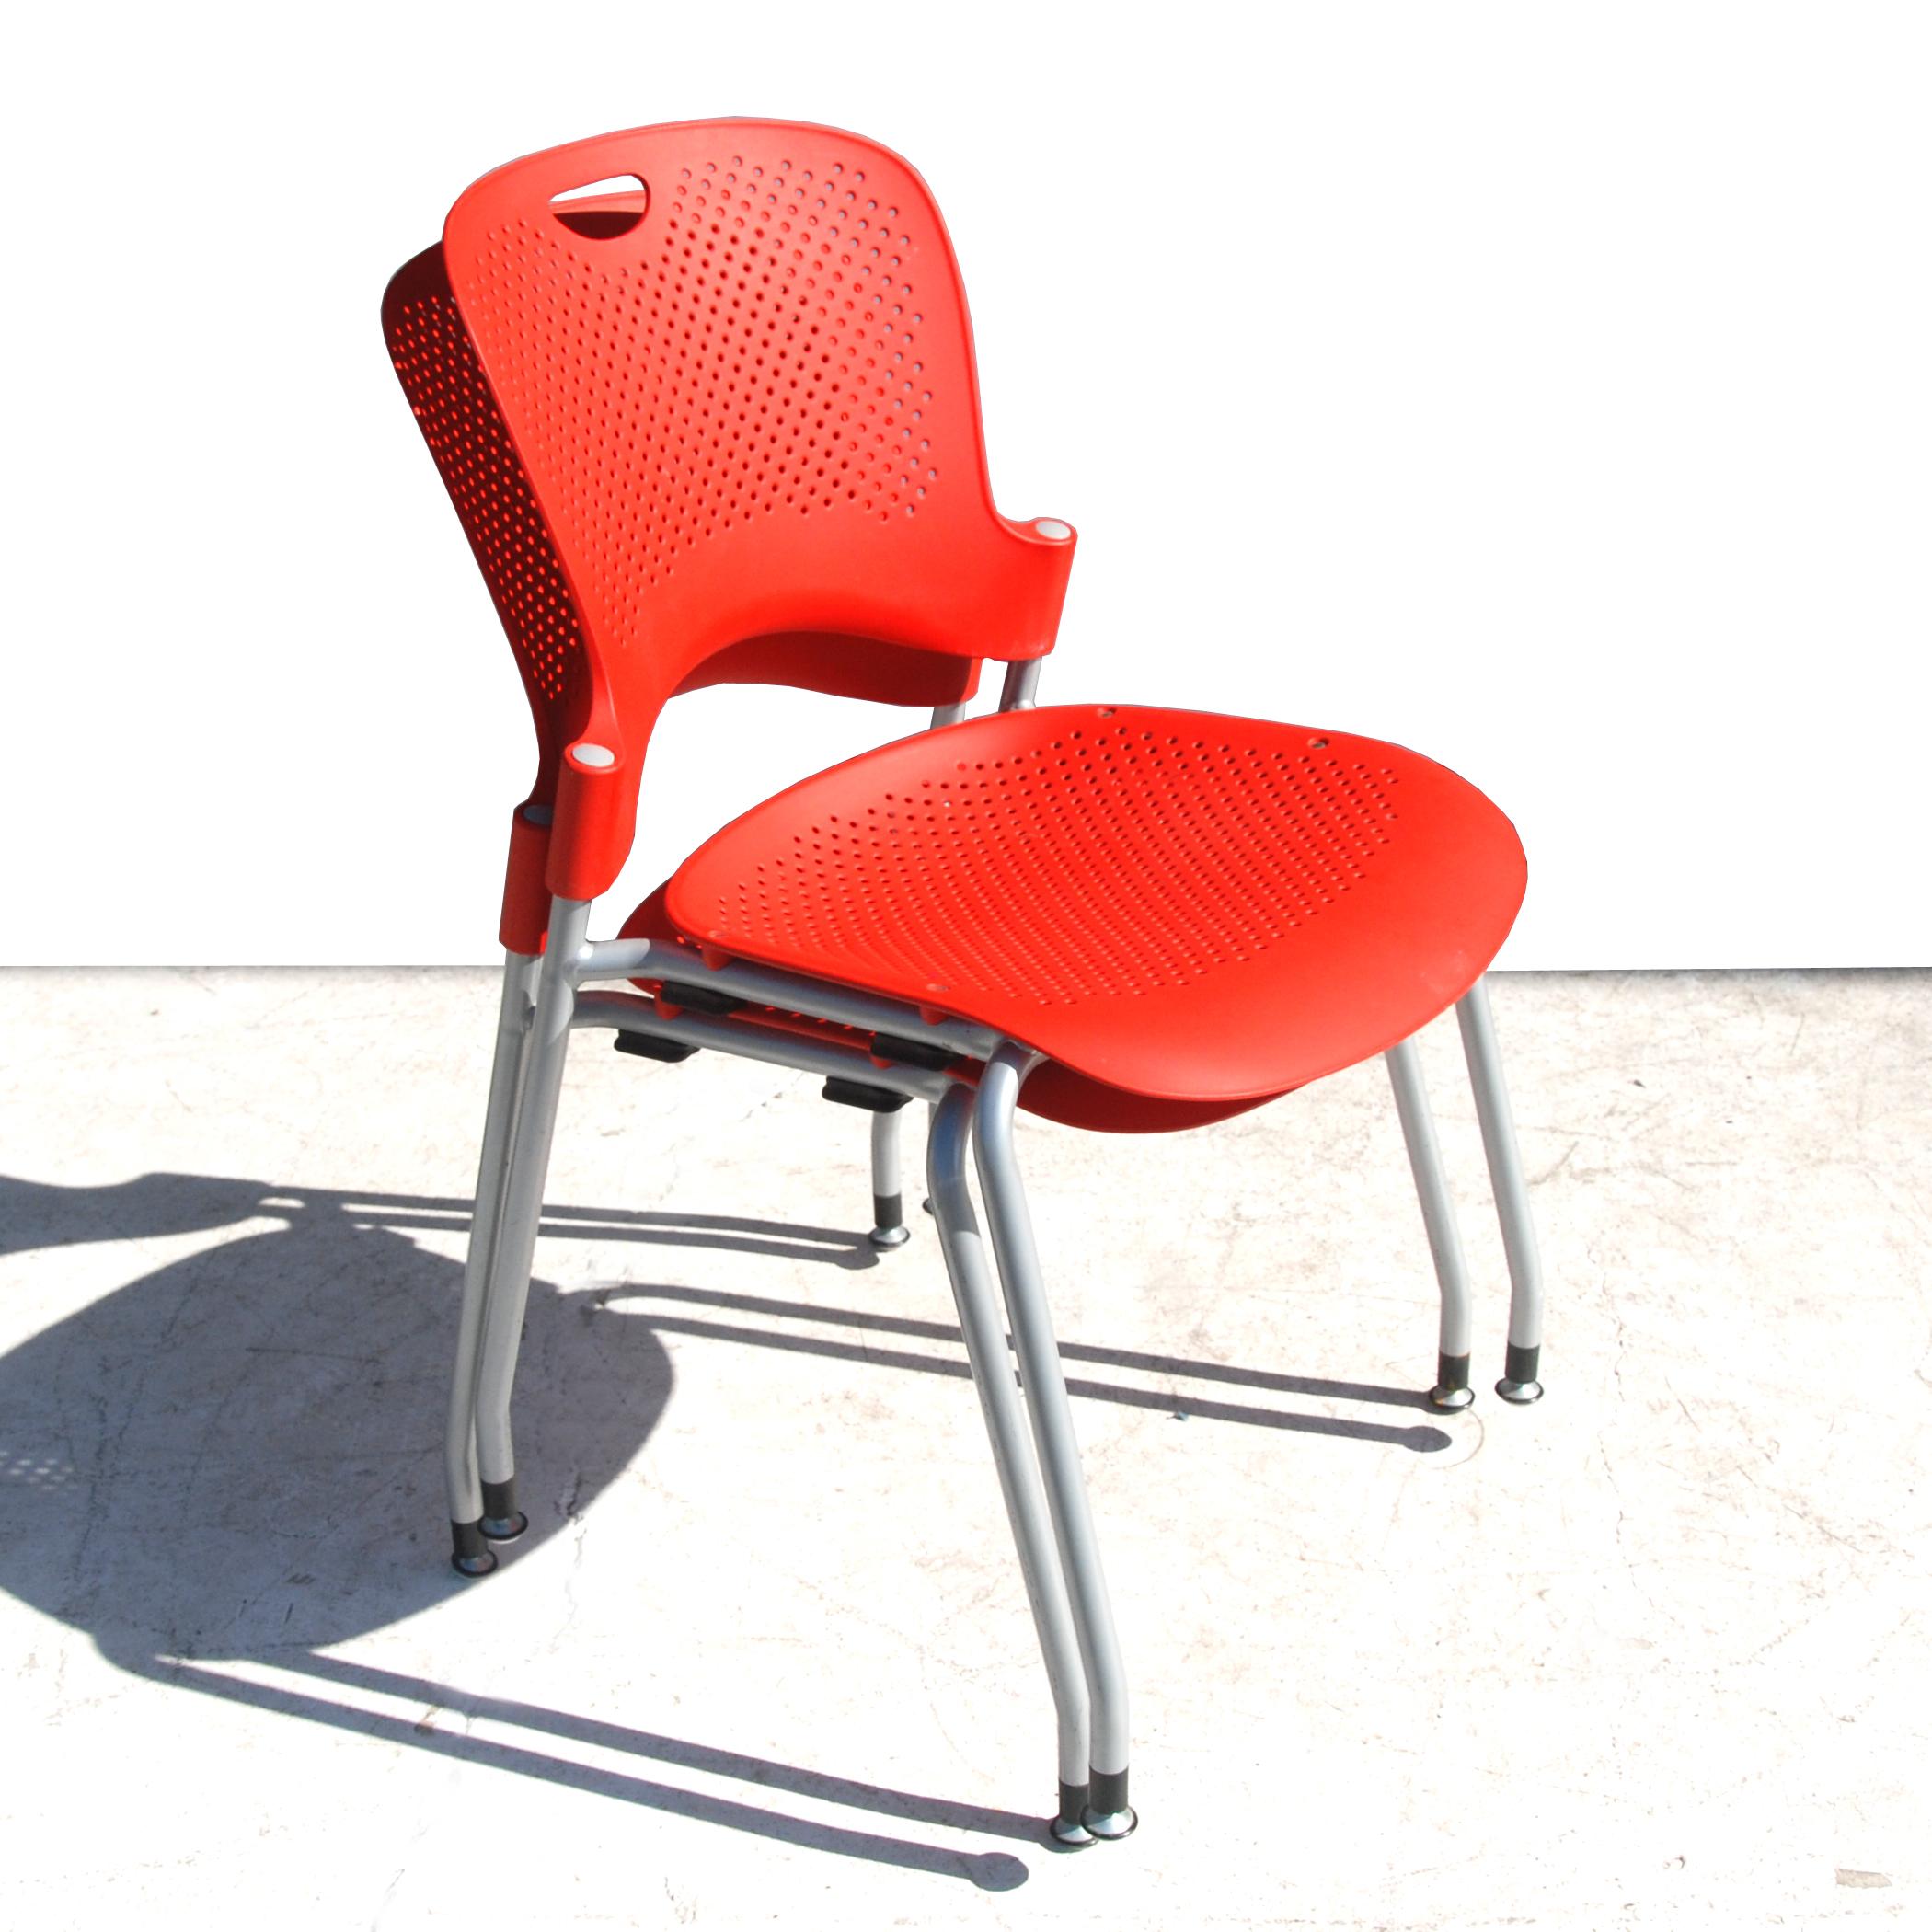 Caper stacking chair
Designed by Jeff Weber for Herman Miller
Caper’s polypropylene backrest is contoured to fit your back and perforated with holes to allow your body to breathe, which helps moisture and heat to dissipate so you remain